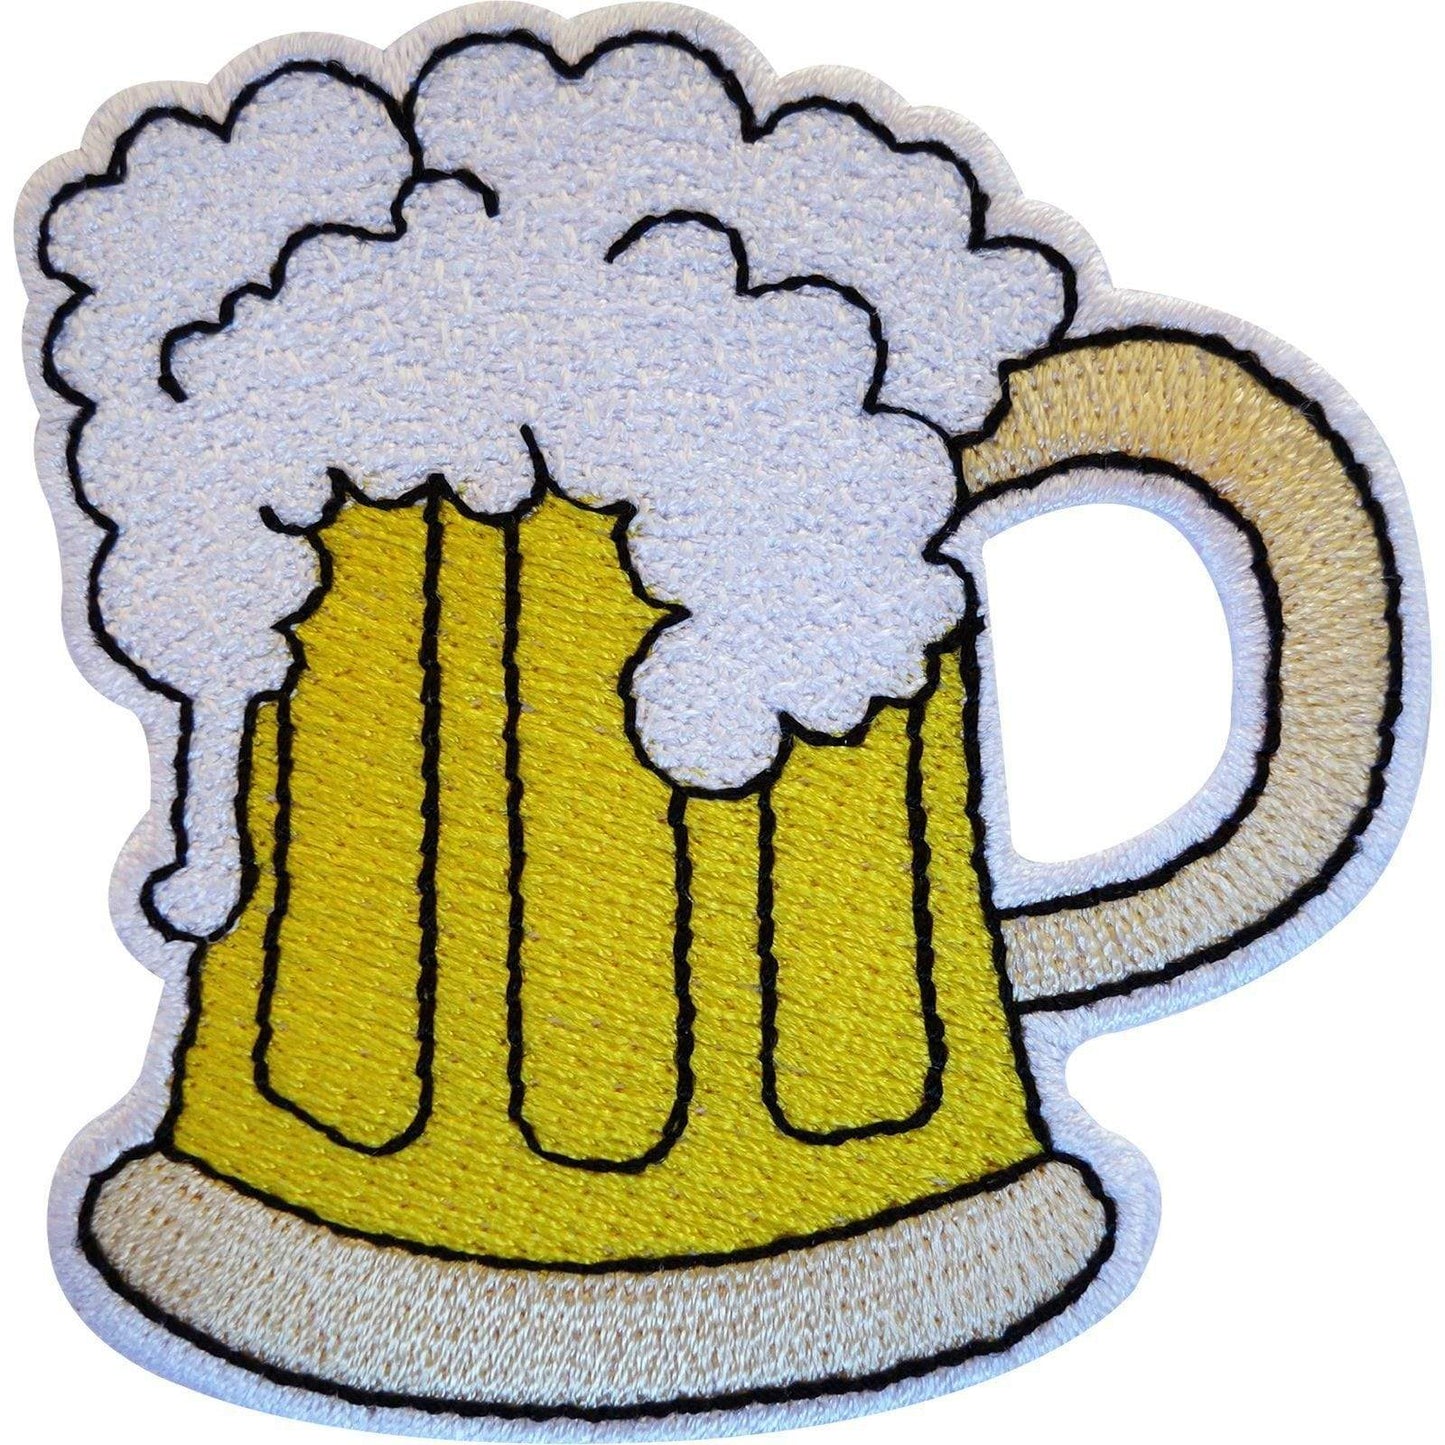 Embroidered Pint Glass of Beer Iron On Patch Sew On Badge Food Drink Embroidery